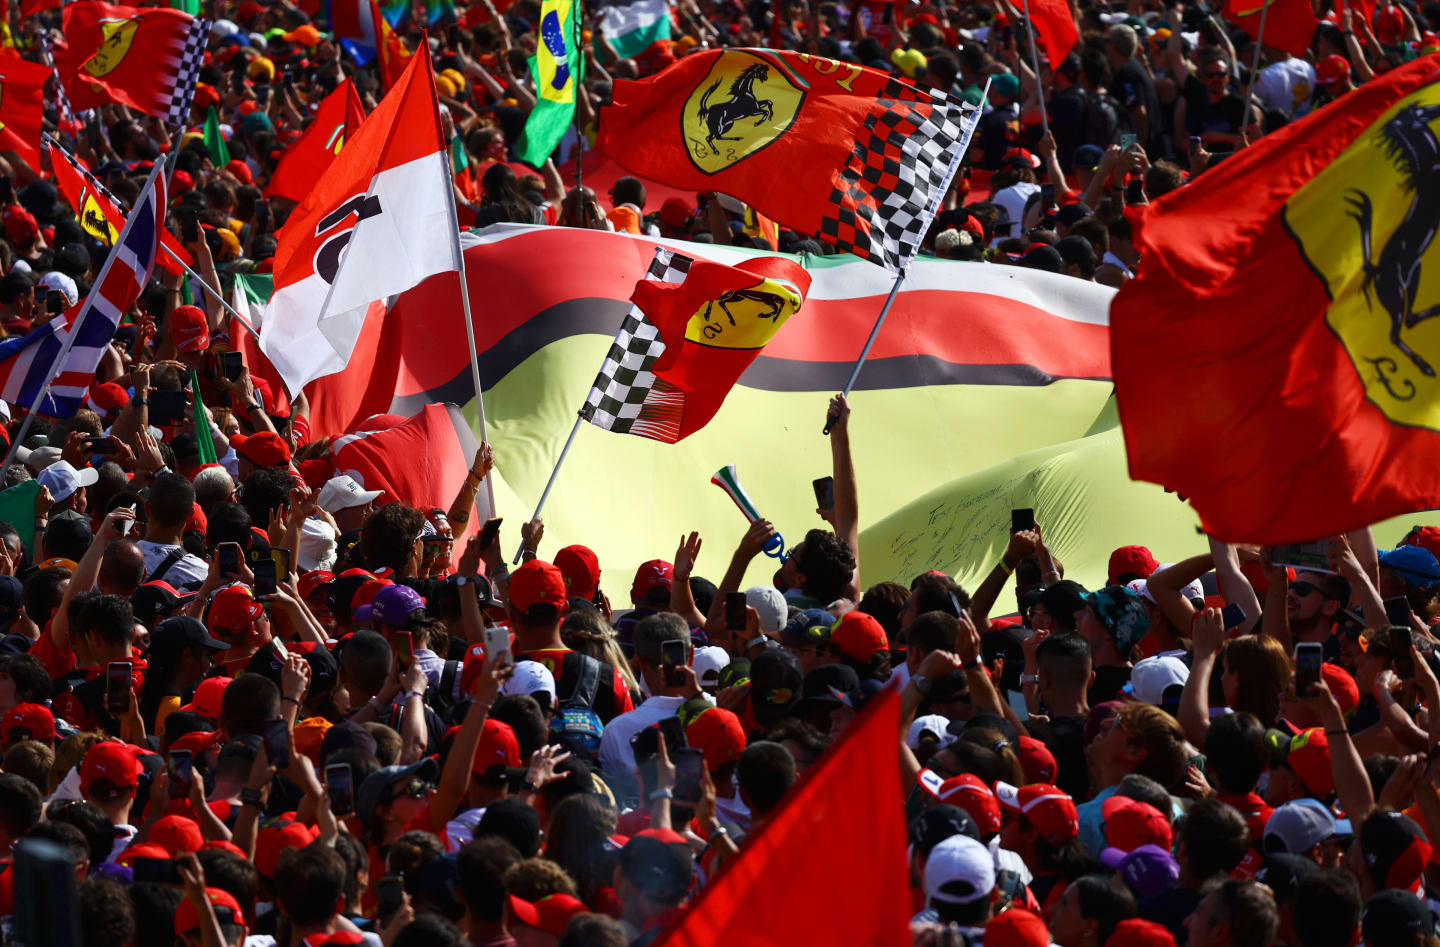 MONZA, ITALY - SEPTEMBER 03: Ferrari fans wave flags at the podium celebrations during the F1 Grand